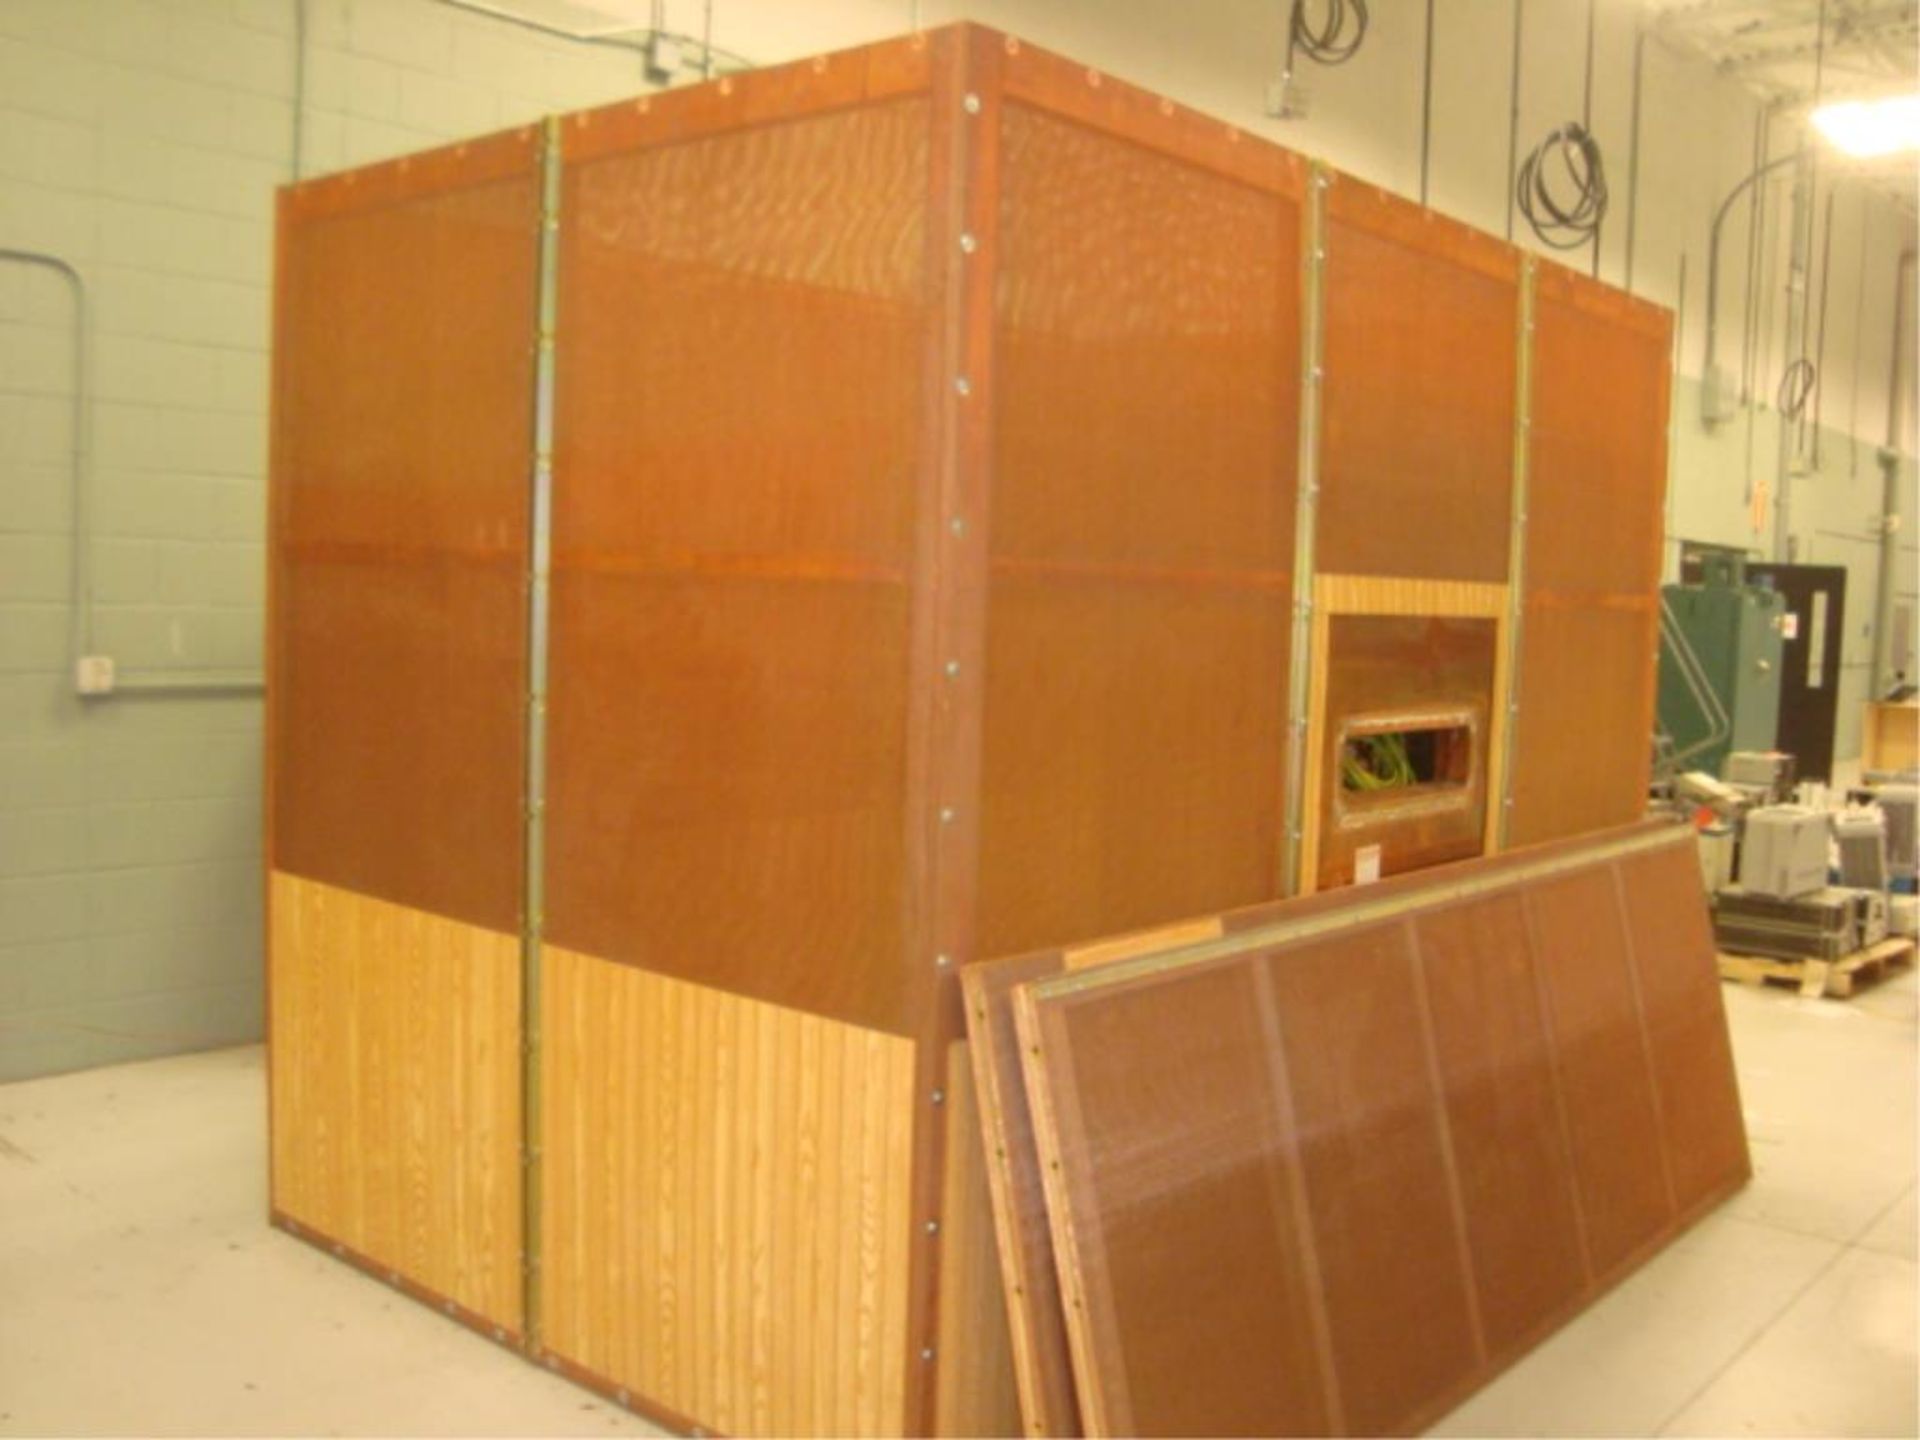 Modular Copper Screened RF Shielded Isolation Room - Image 14 of 17